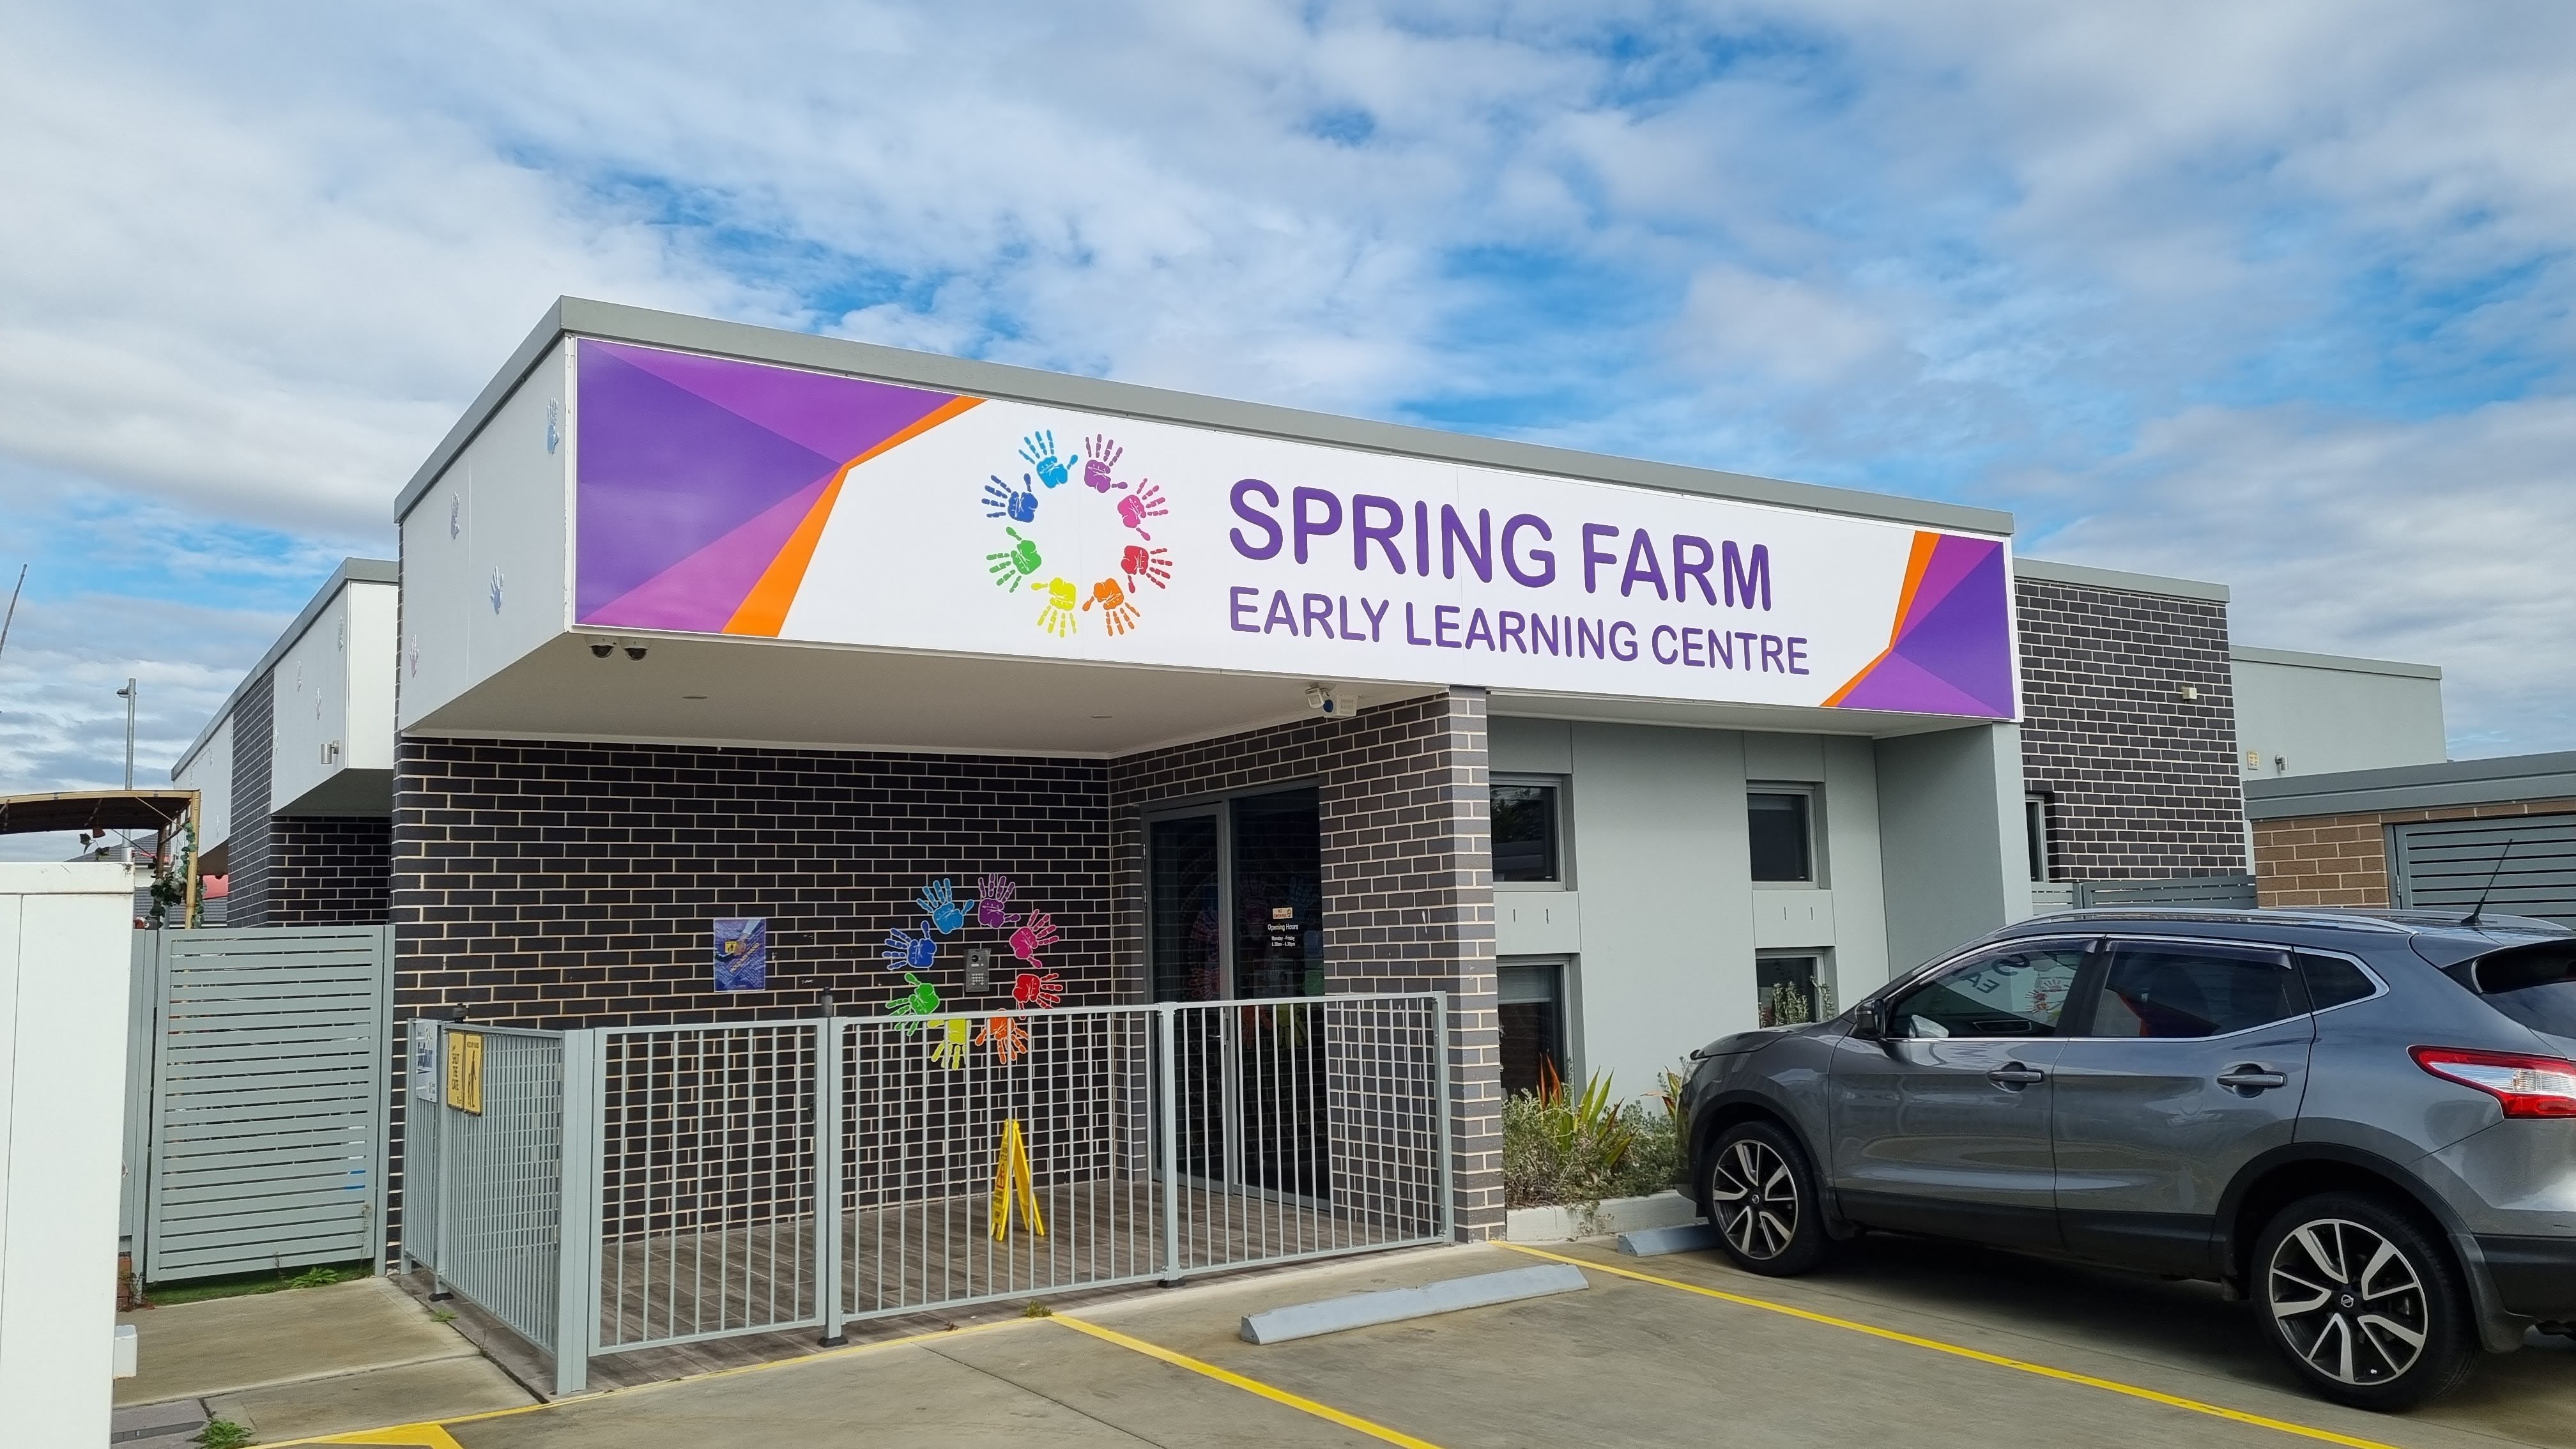 SPRING FARM EARLY LEARNING